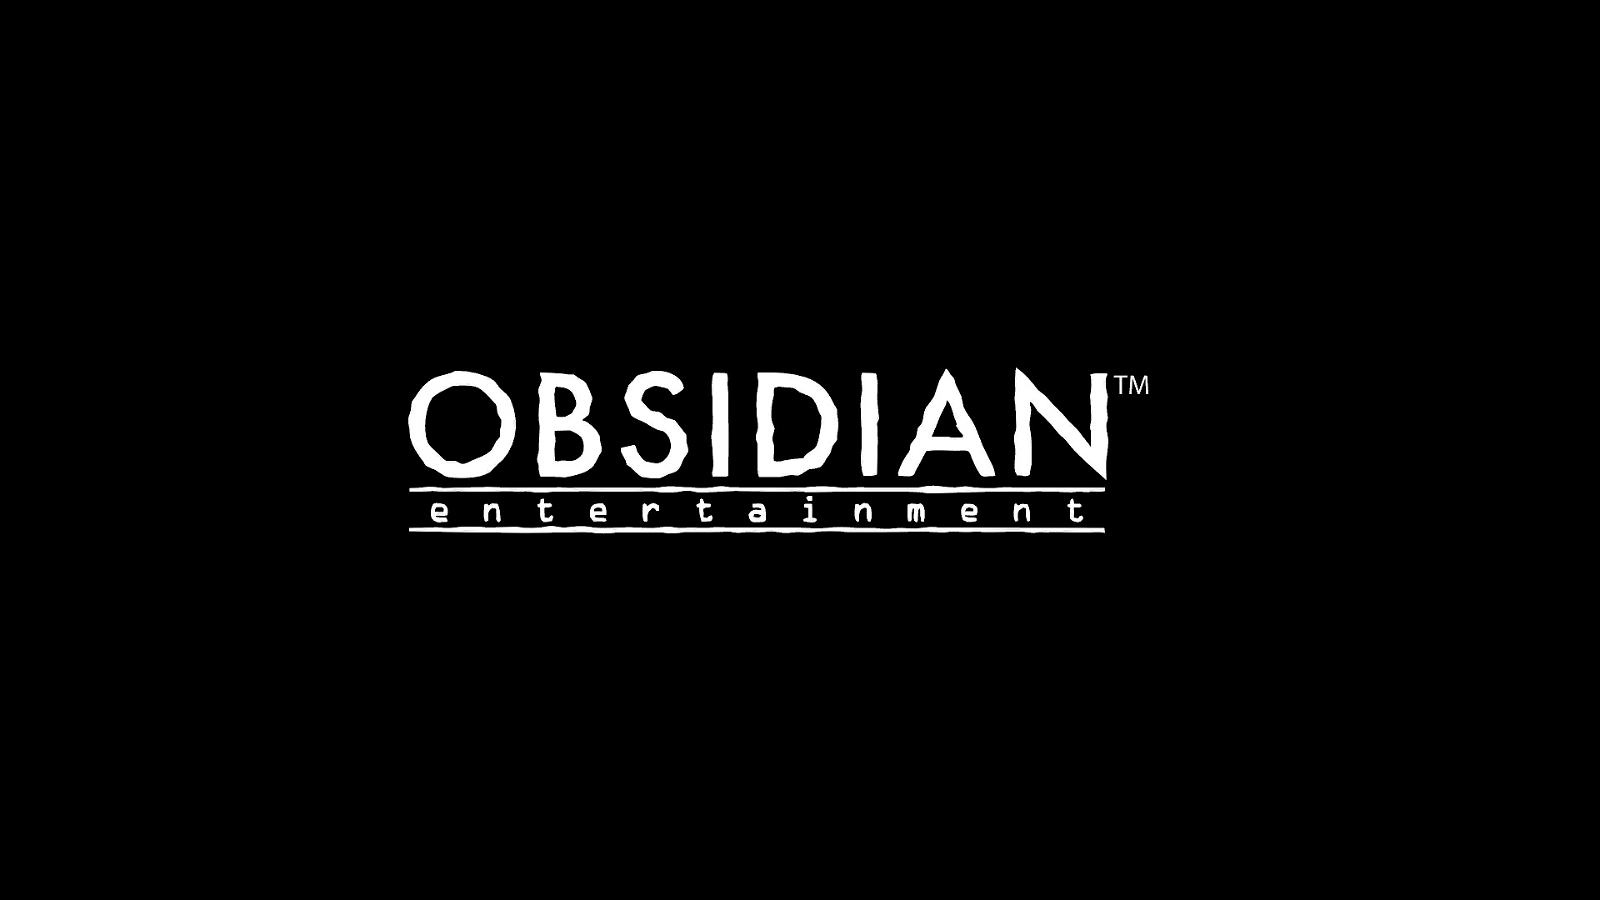 Obsidian Entertainment is the studio behind Fallout: New Vegas' sucess